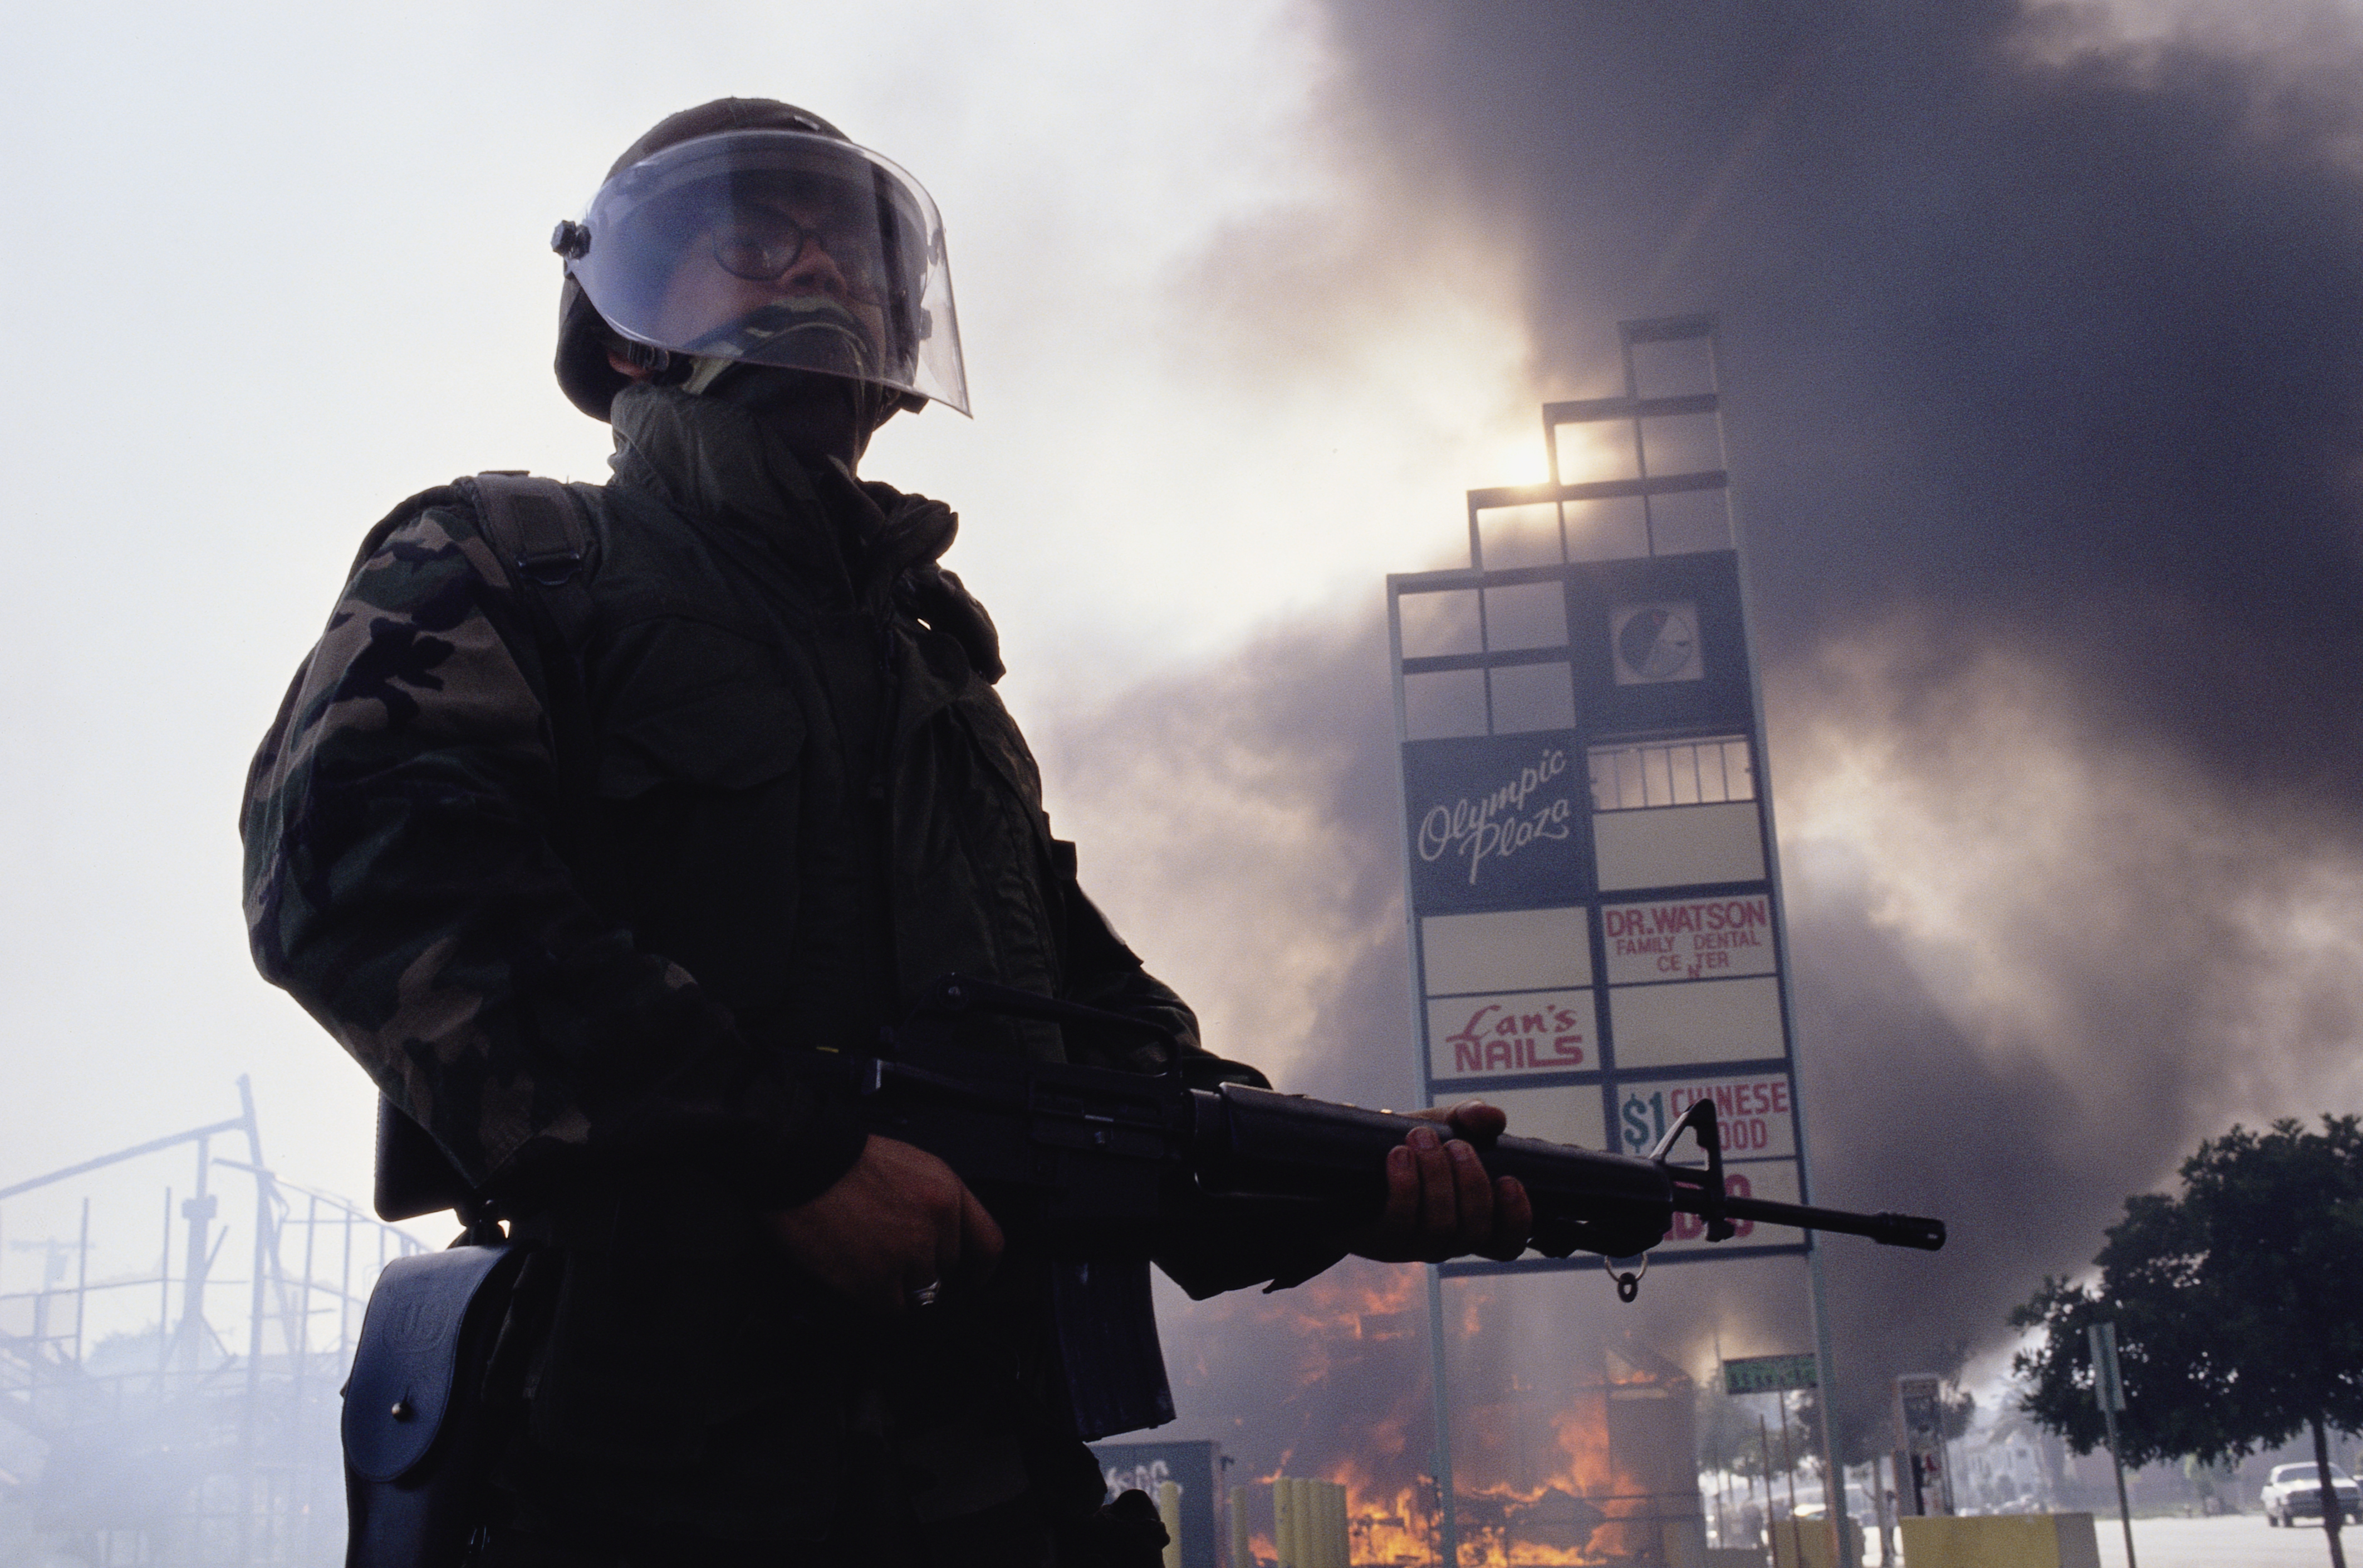 A member of the National Guard stands near burning building during the Los Angeles riots. In April of 1992, after a jury acquitted the police officers involved in the beating of Rodney King, riots broke out throughout South Central Los Angeles, killing 55 people, injuring another 2,000, and causing more than $1 billion in damage. (Photo by David Butow/Corbis via Getty Images)